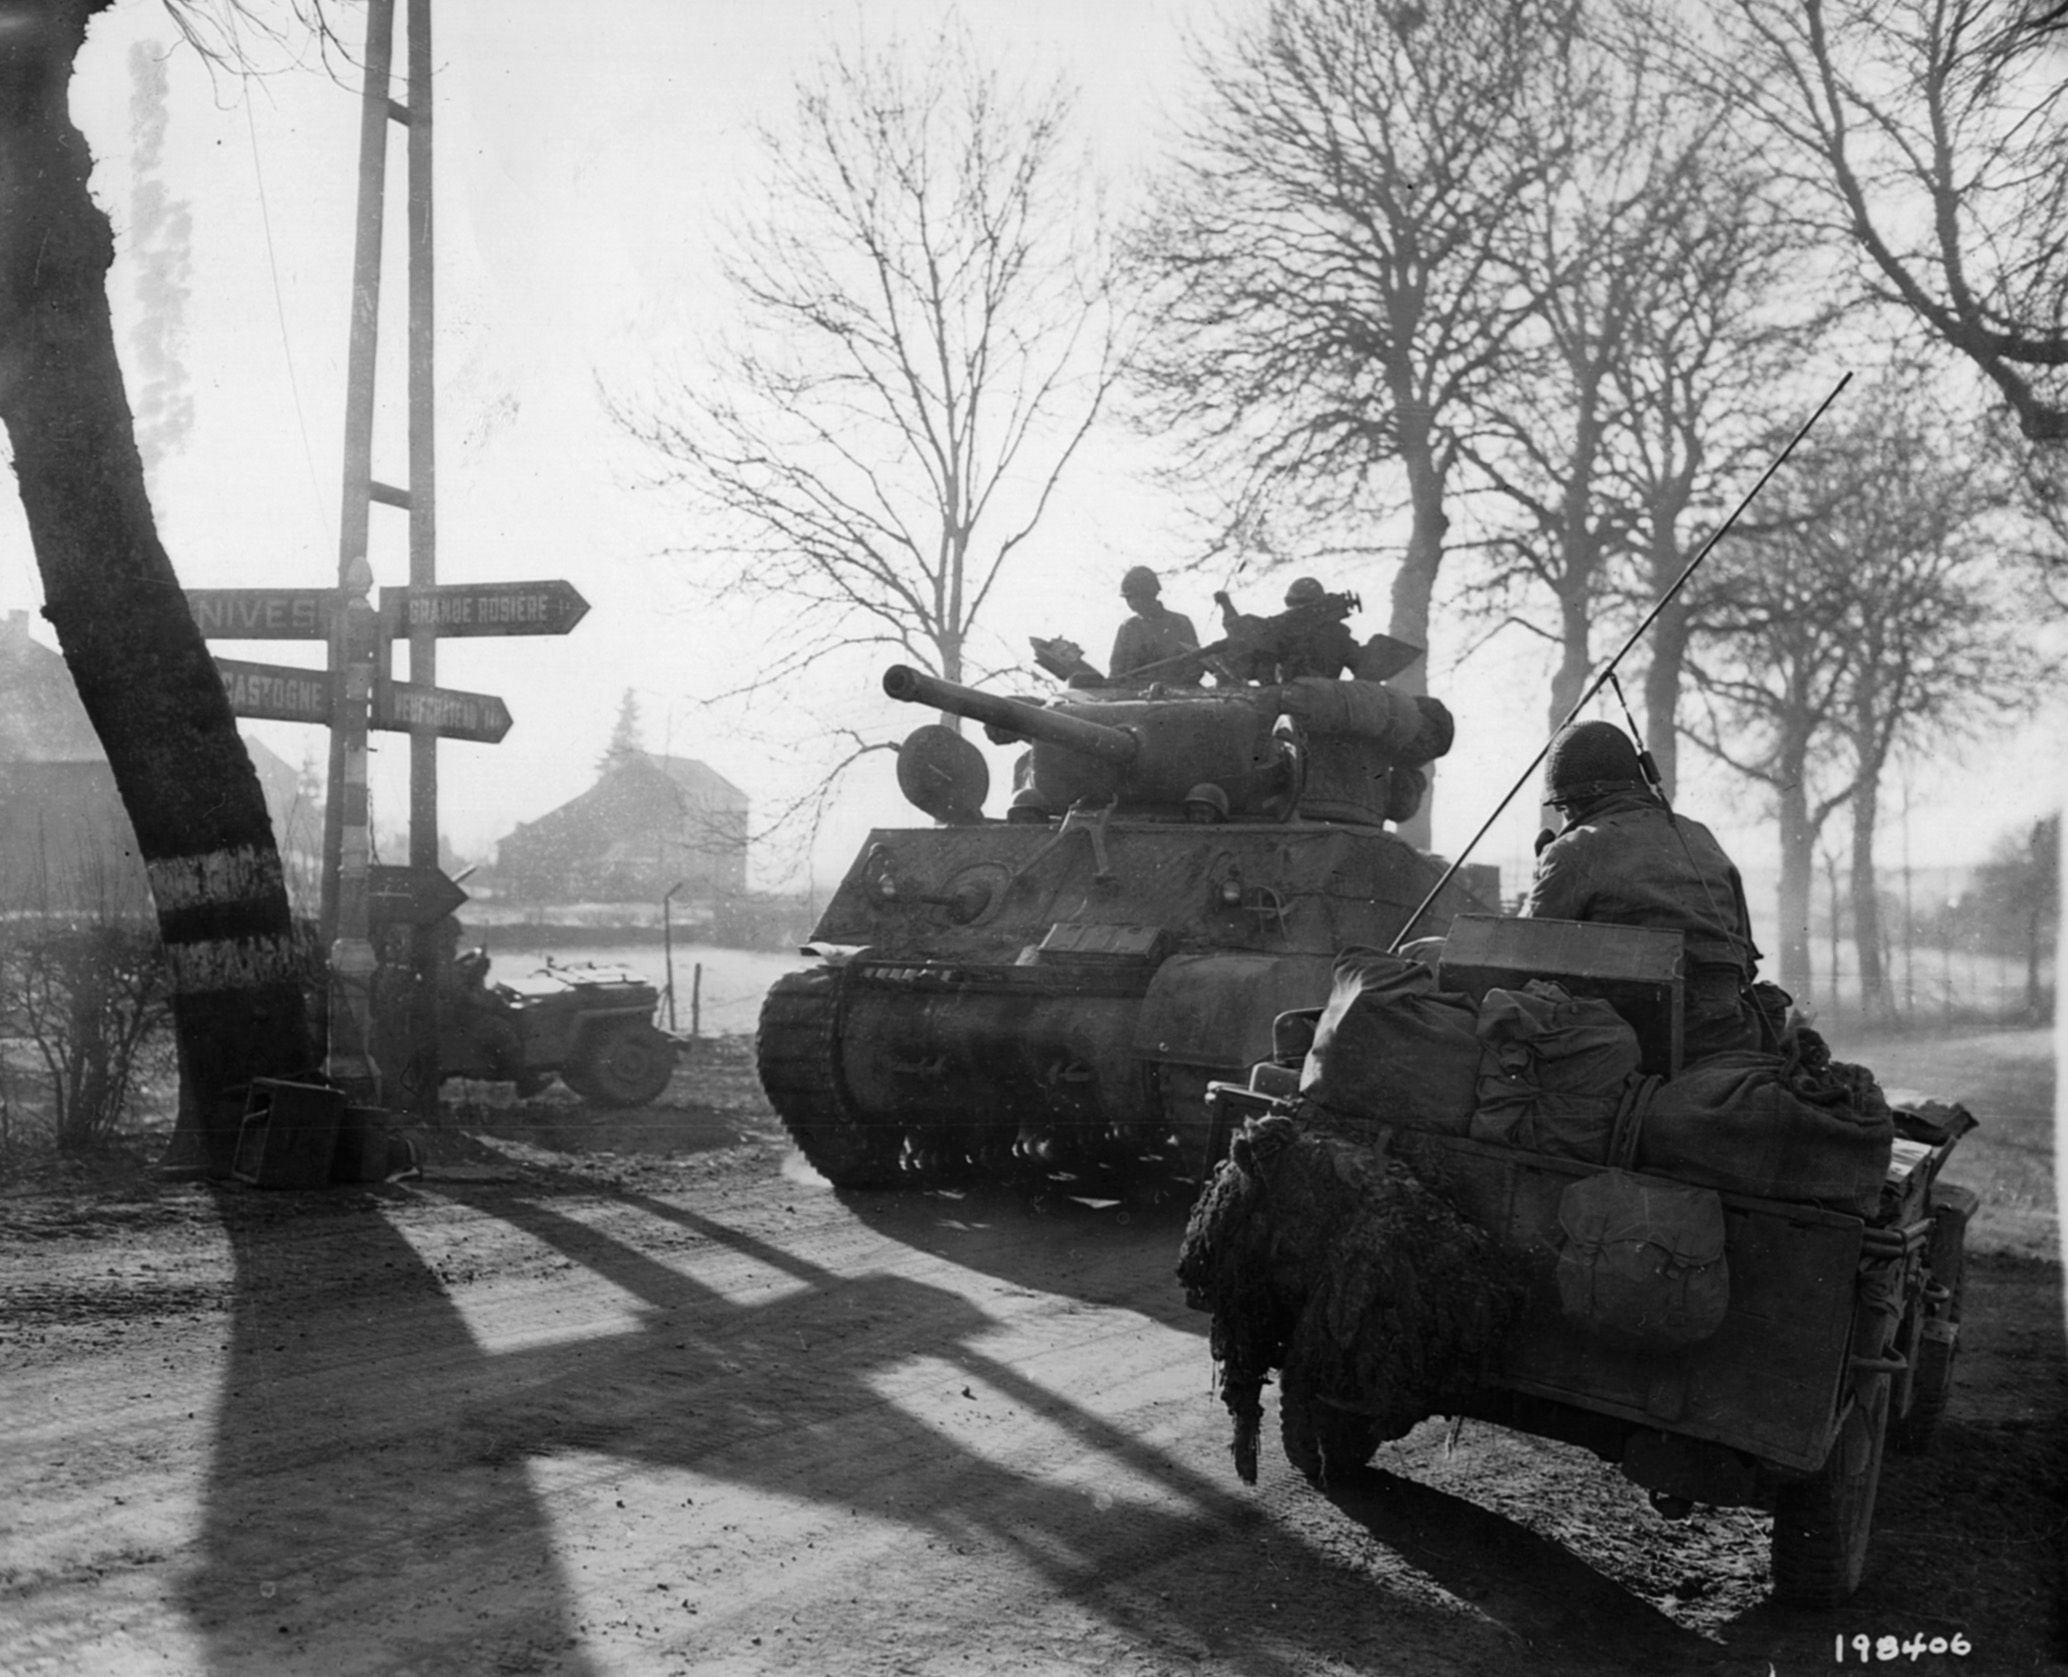 A Sherman tank of the 9th Armored Division heads into action against the advancing Germans during the Battle of the Bulge. The fighting in the Ardennes was some of fiercest of the war on the Western Front.